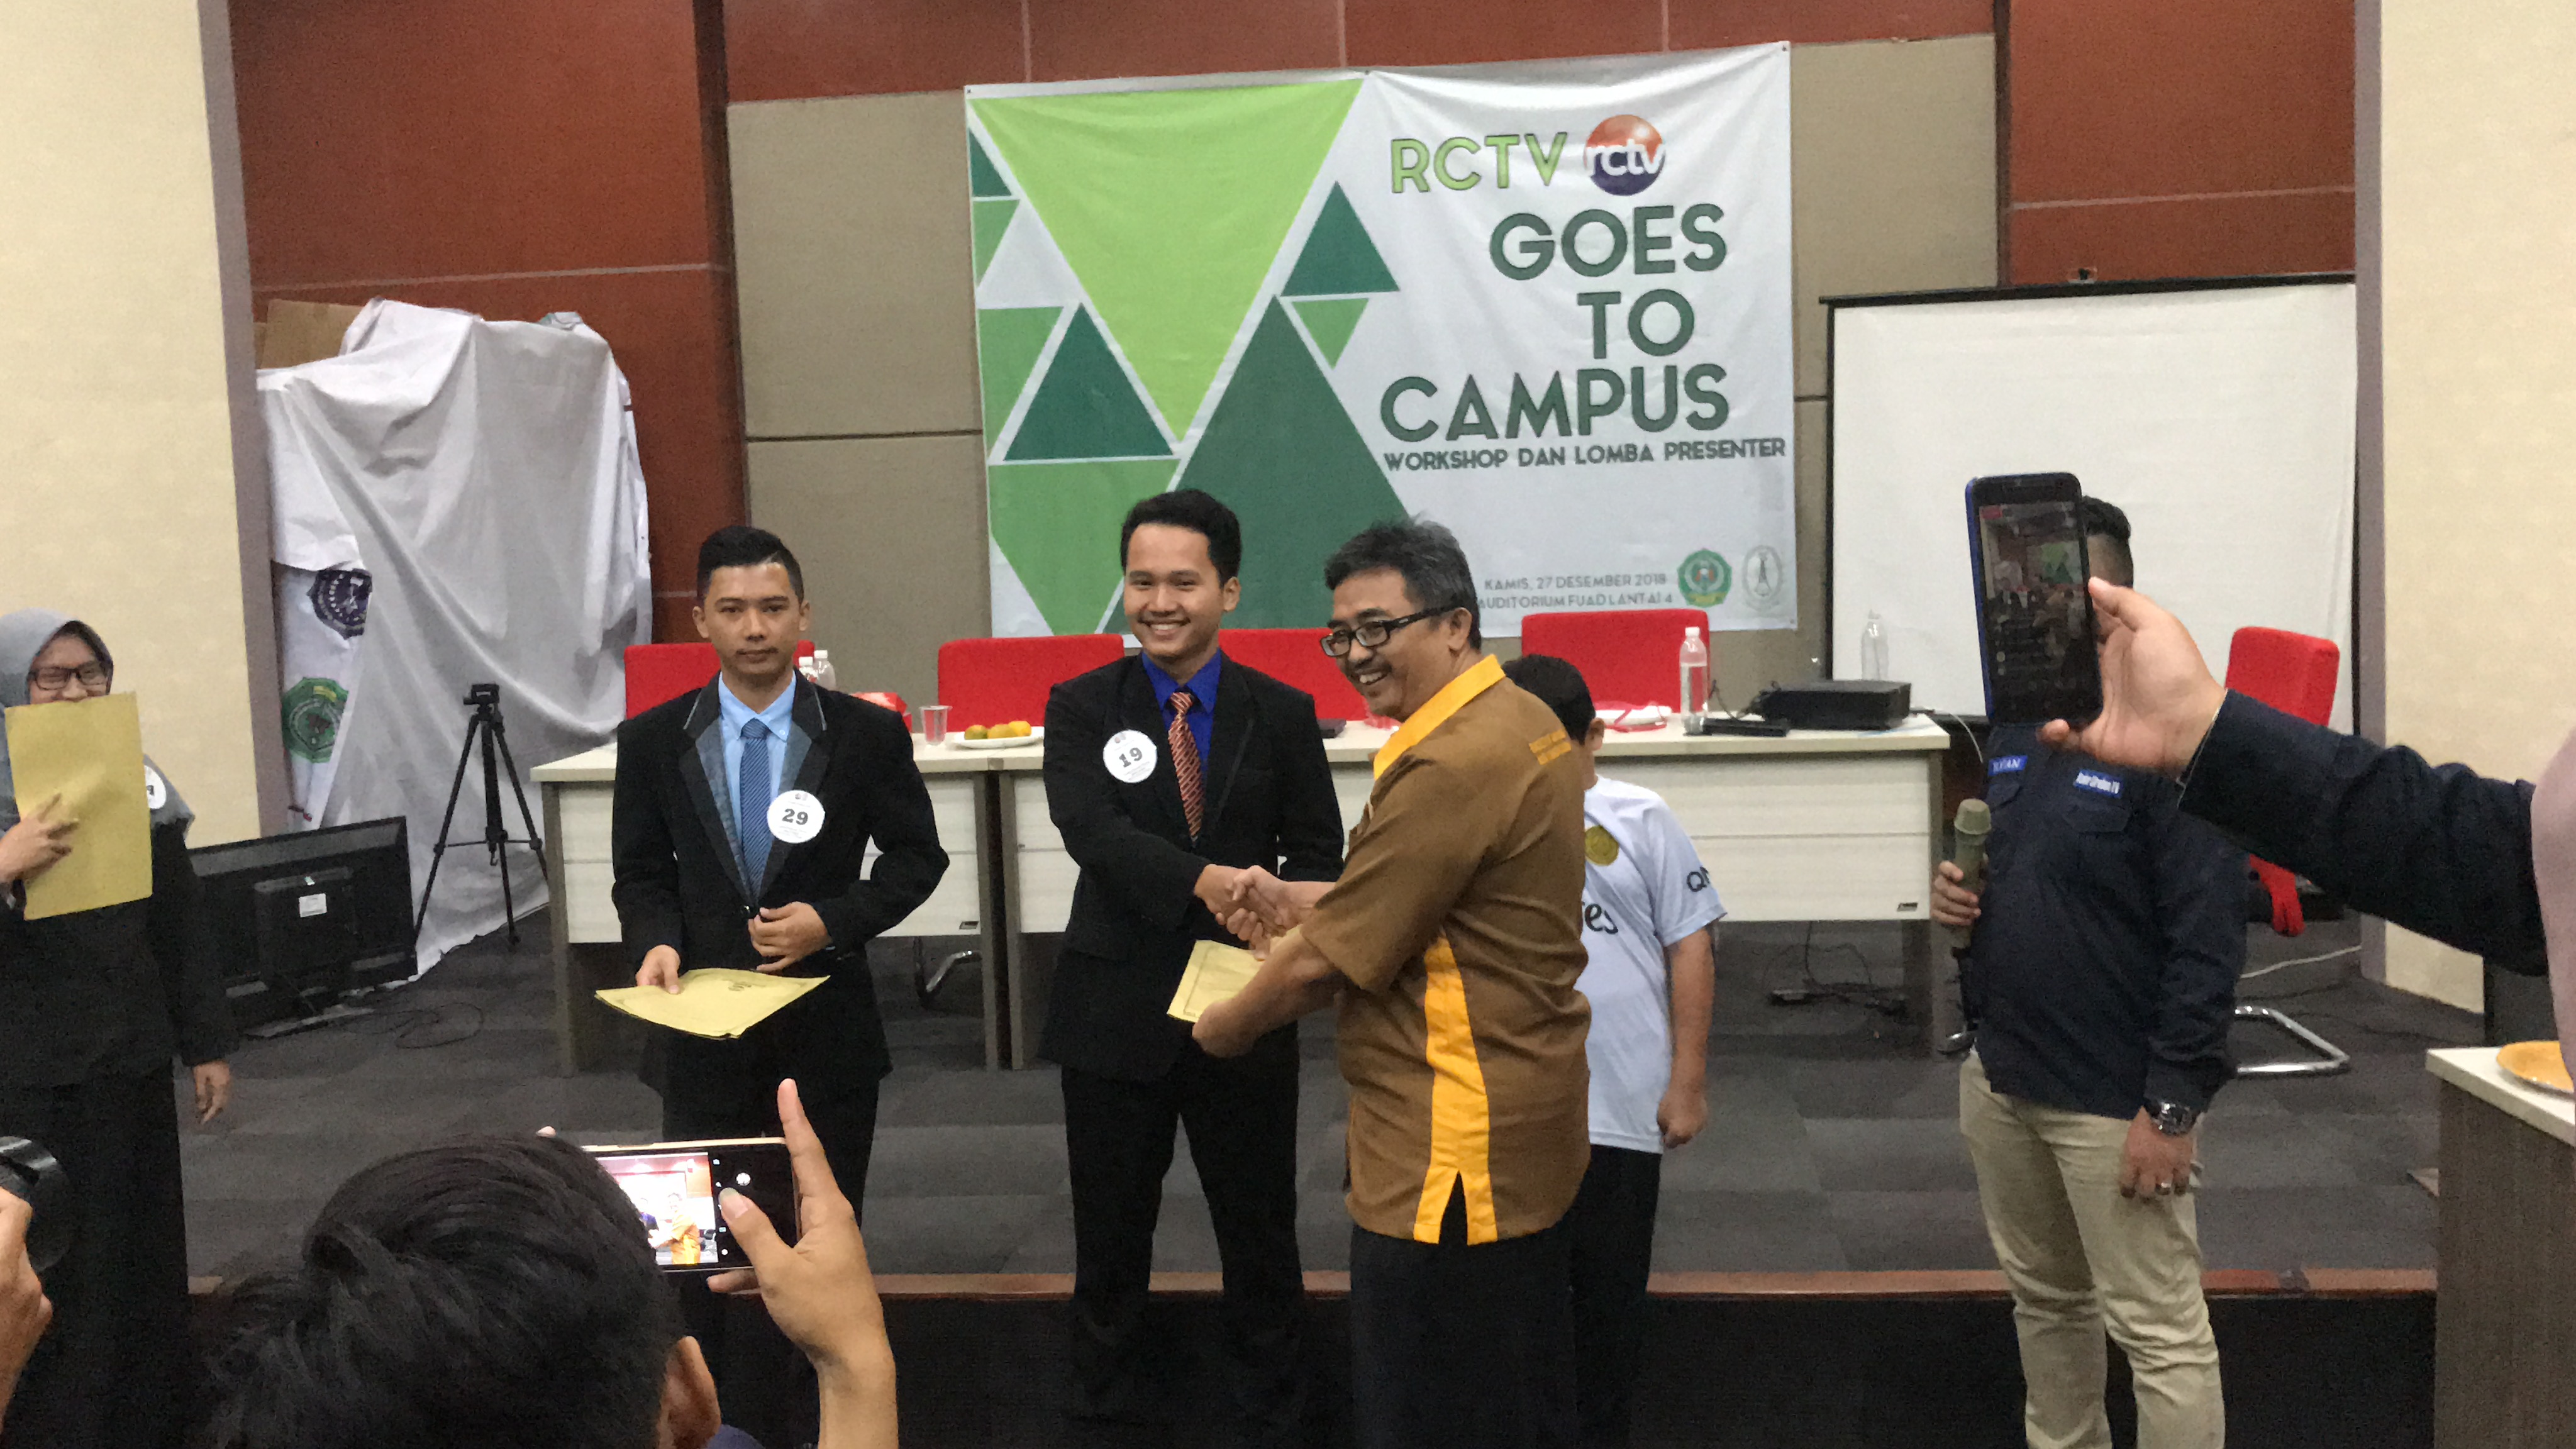 Foto Lomba News Presenter RCTV goes to campus